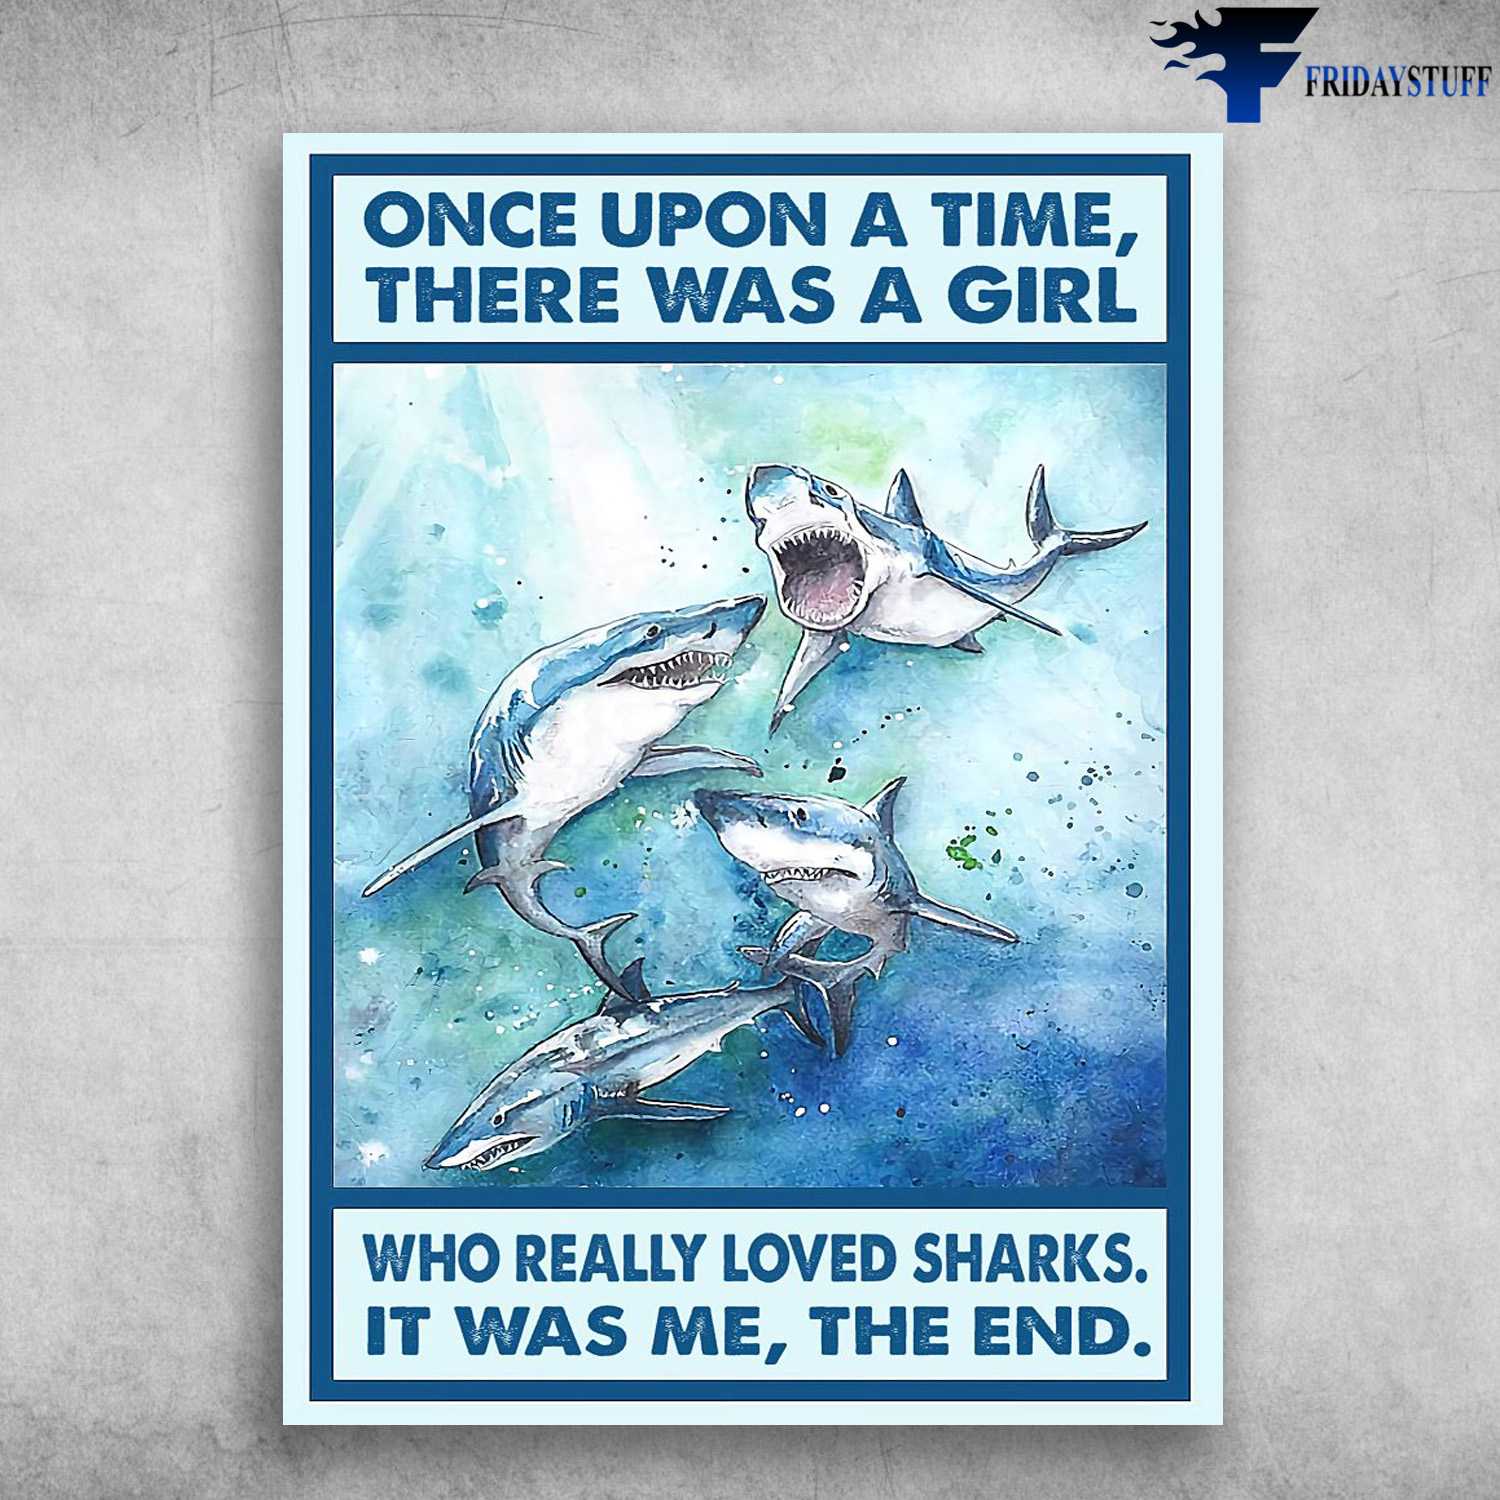 Shark Poster, Once Upon A Time, There Was A Girl, Who Really Loved Sharks, It Was Me, The End